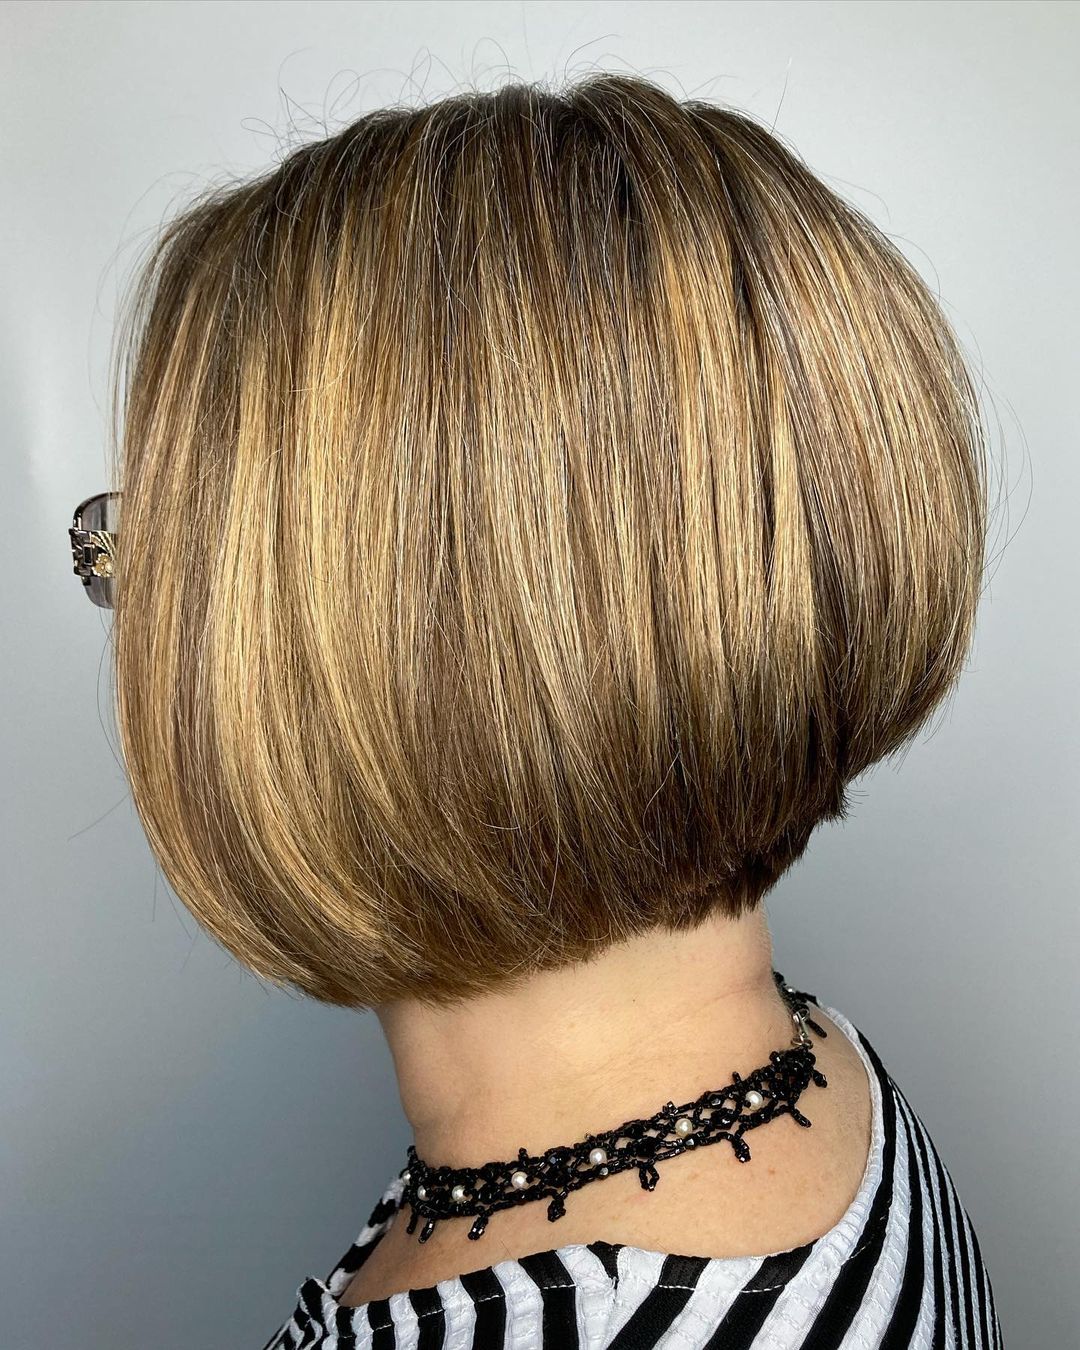 Stacked Bob 72 Long stacked bob | Medium length stacked bob | Pictures of stacked bob haircuts front and back Stacked Bob Hairstyles for Women